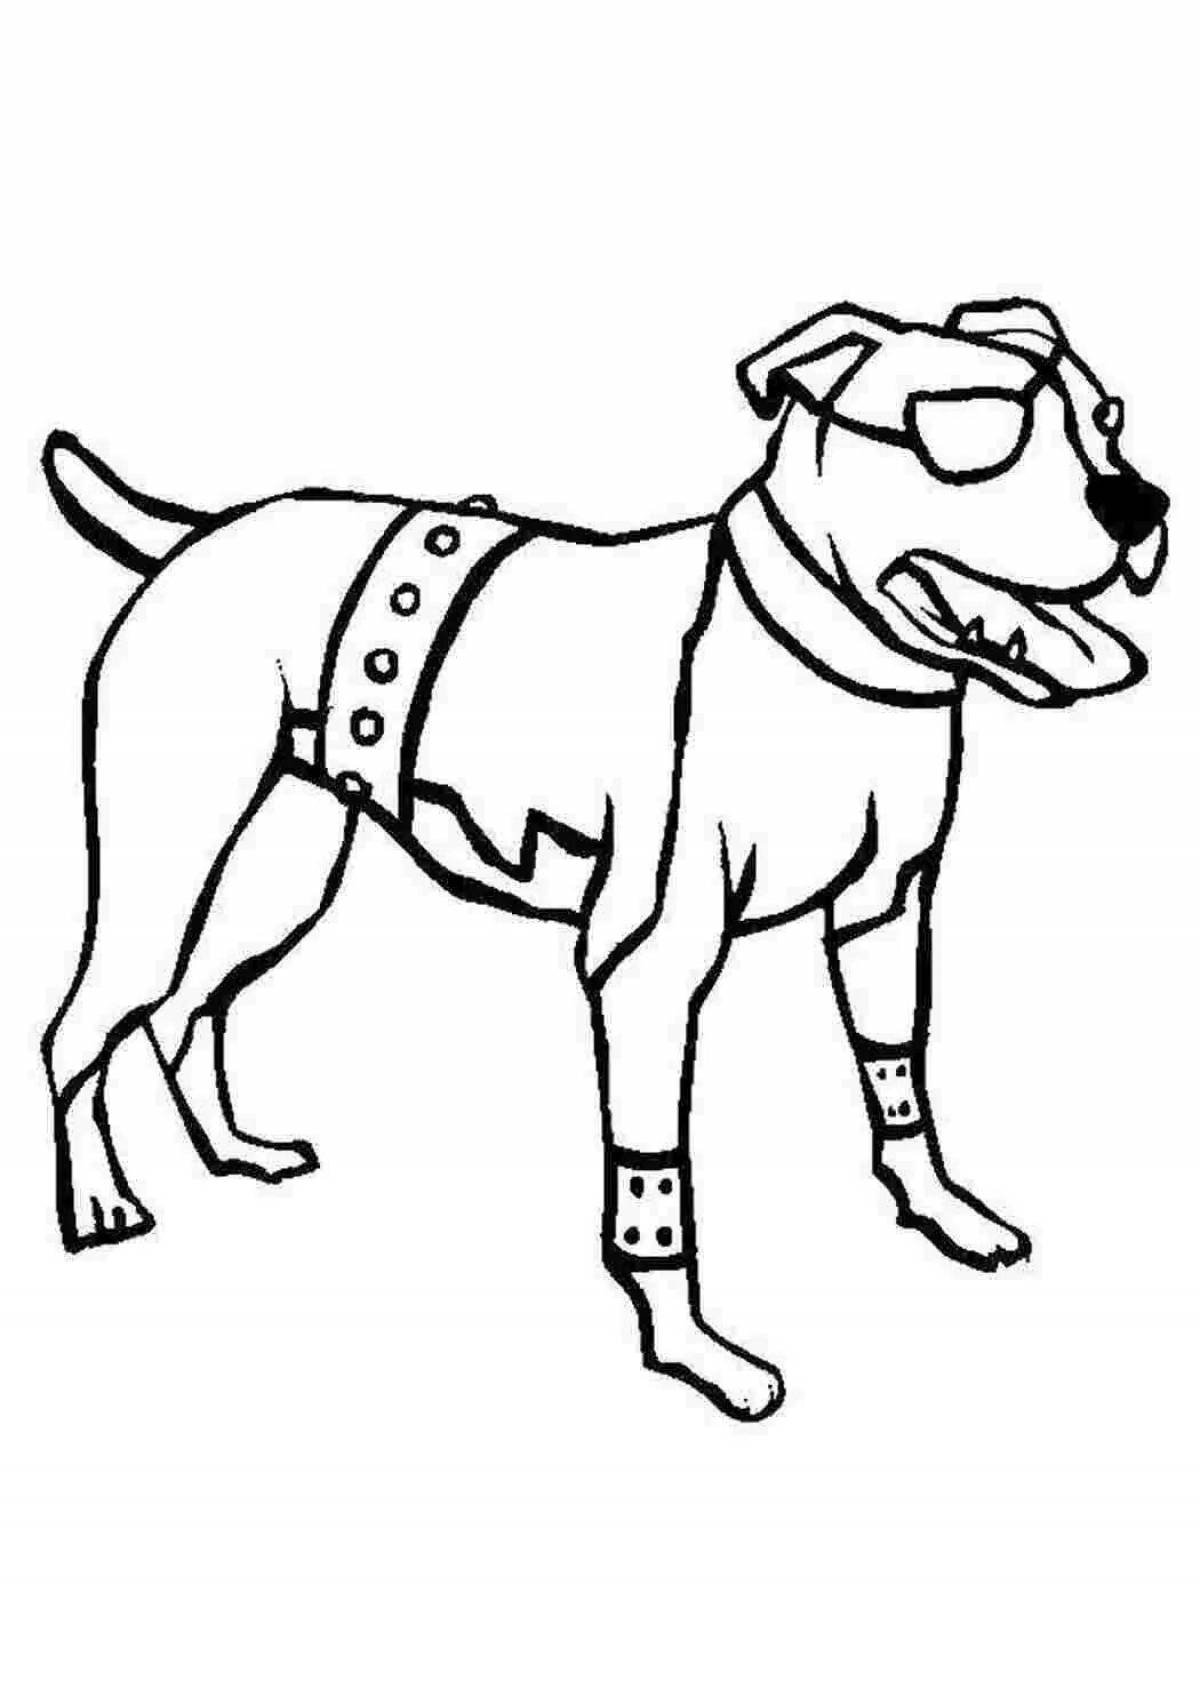 Colouring funny pit bull dog